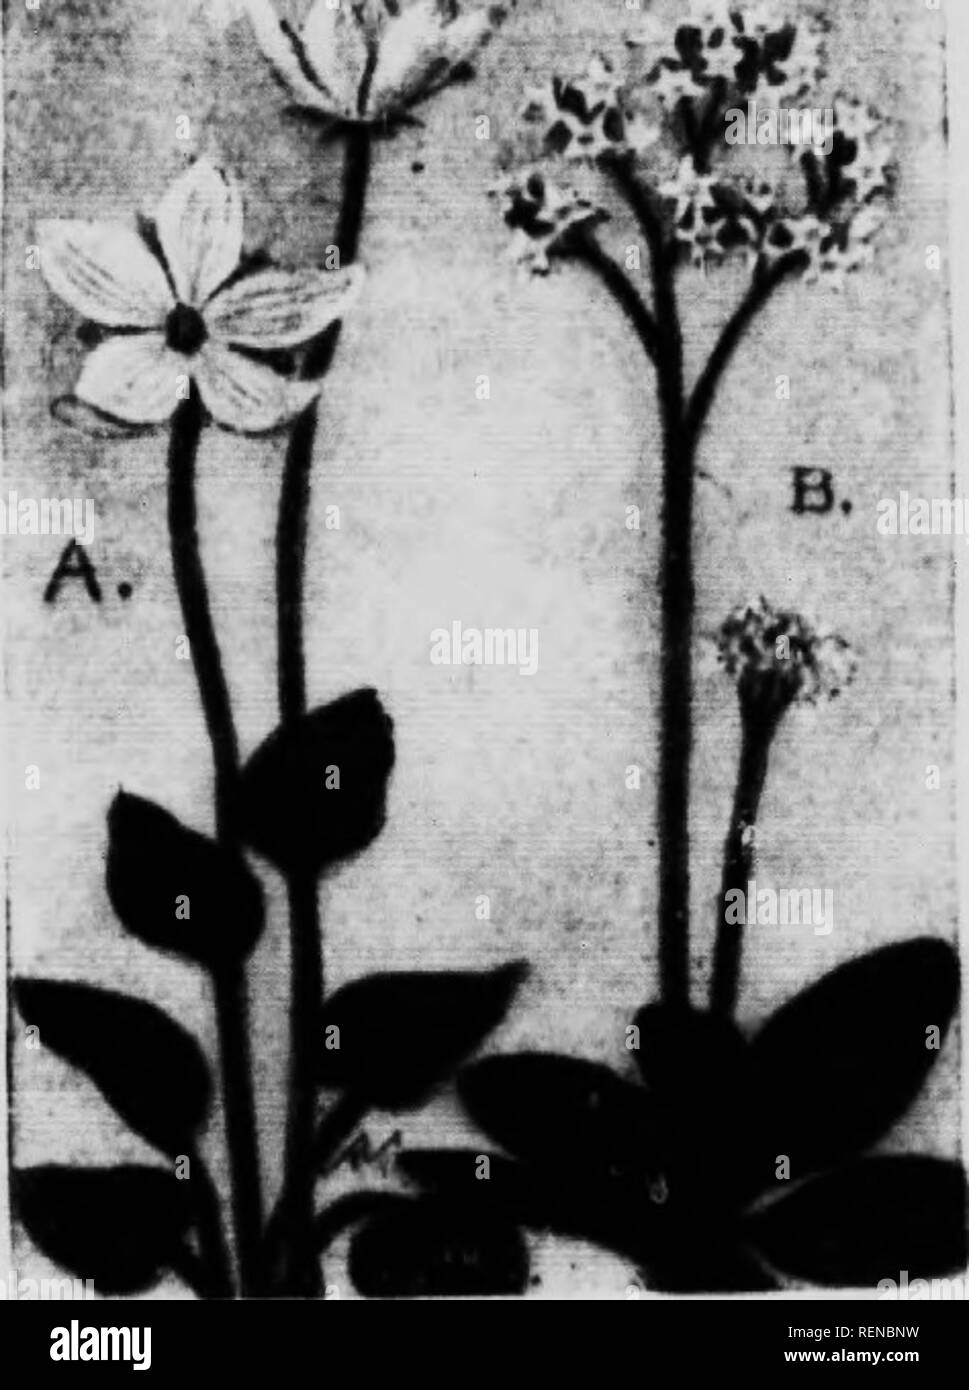 . Flower guide [microform] : wild flowers east of the Rockies. Flowers; Fleurs; Botanique; Botany. SAXIFRAGE FAMILY (Ndji/iiii/'&quot;''&quot;') ( ) Grams ok 1'arnassis [I'nnmssia va, Jniiunn) n a im-ttv little MWiuiii) or iiinidow plant giowniK tioiii H to 24 iMcl»-« l.ijsl.. The llowrs art- a .lelioite ci-aii.y white, tiiielv veiiUHl with jireeiiish. aii.l iK.nie Mn^'ly on loiiL' seaiH.;: a Hiiigle. heait-.liai.eove .t« l.ase. The hasal leaves are loiis,'tteiiime(l, rather tliiek ami eoarae in tex- ture, smooth edjjed ami hluntly pointed We liiid this sm'cies in hh..m. from the hitter part  Stock Photo